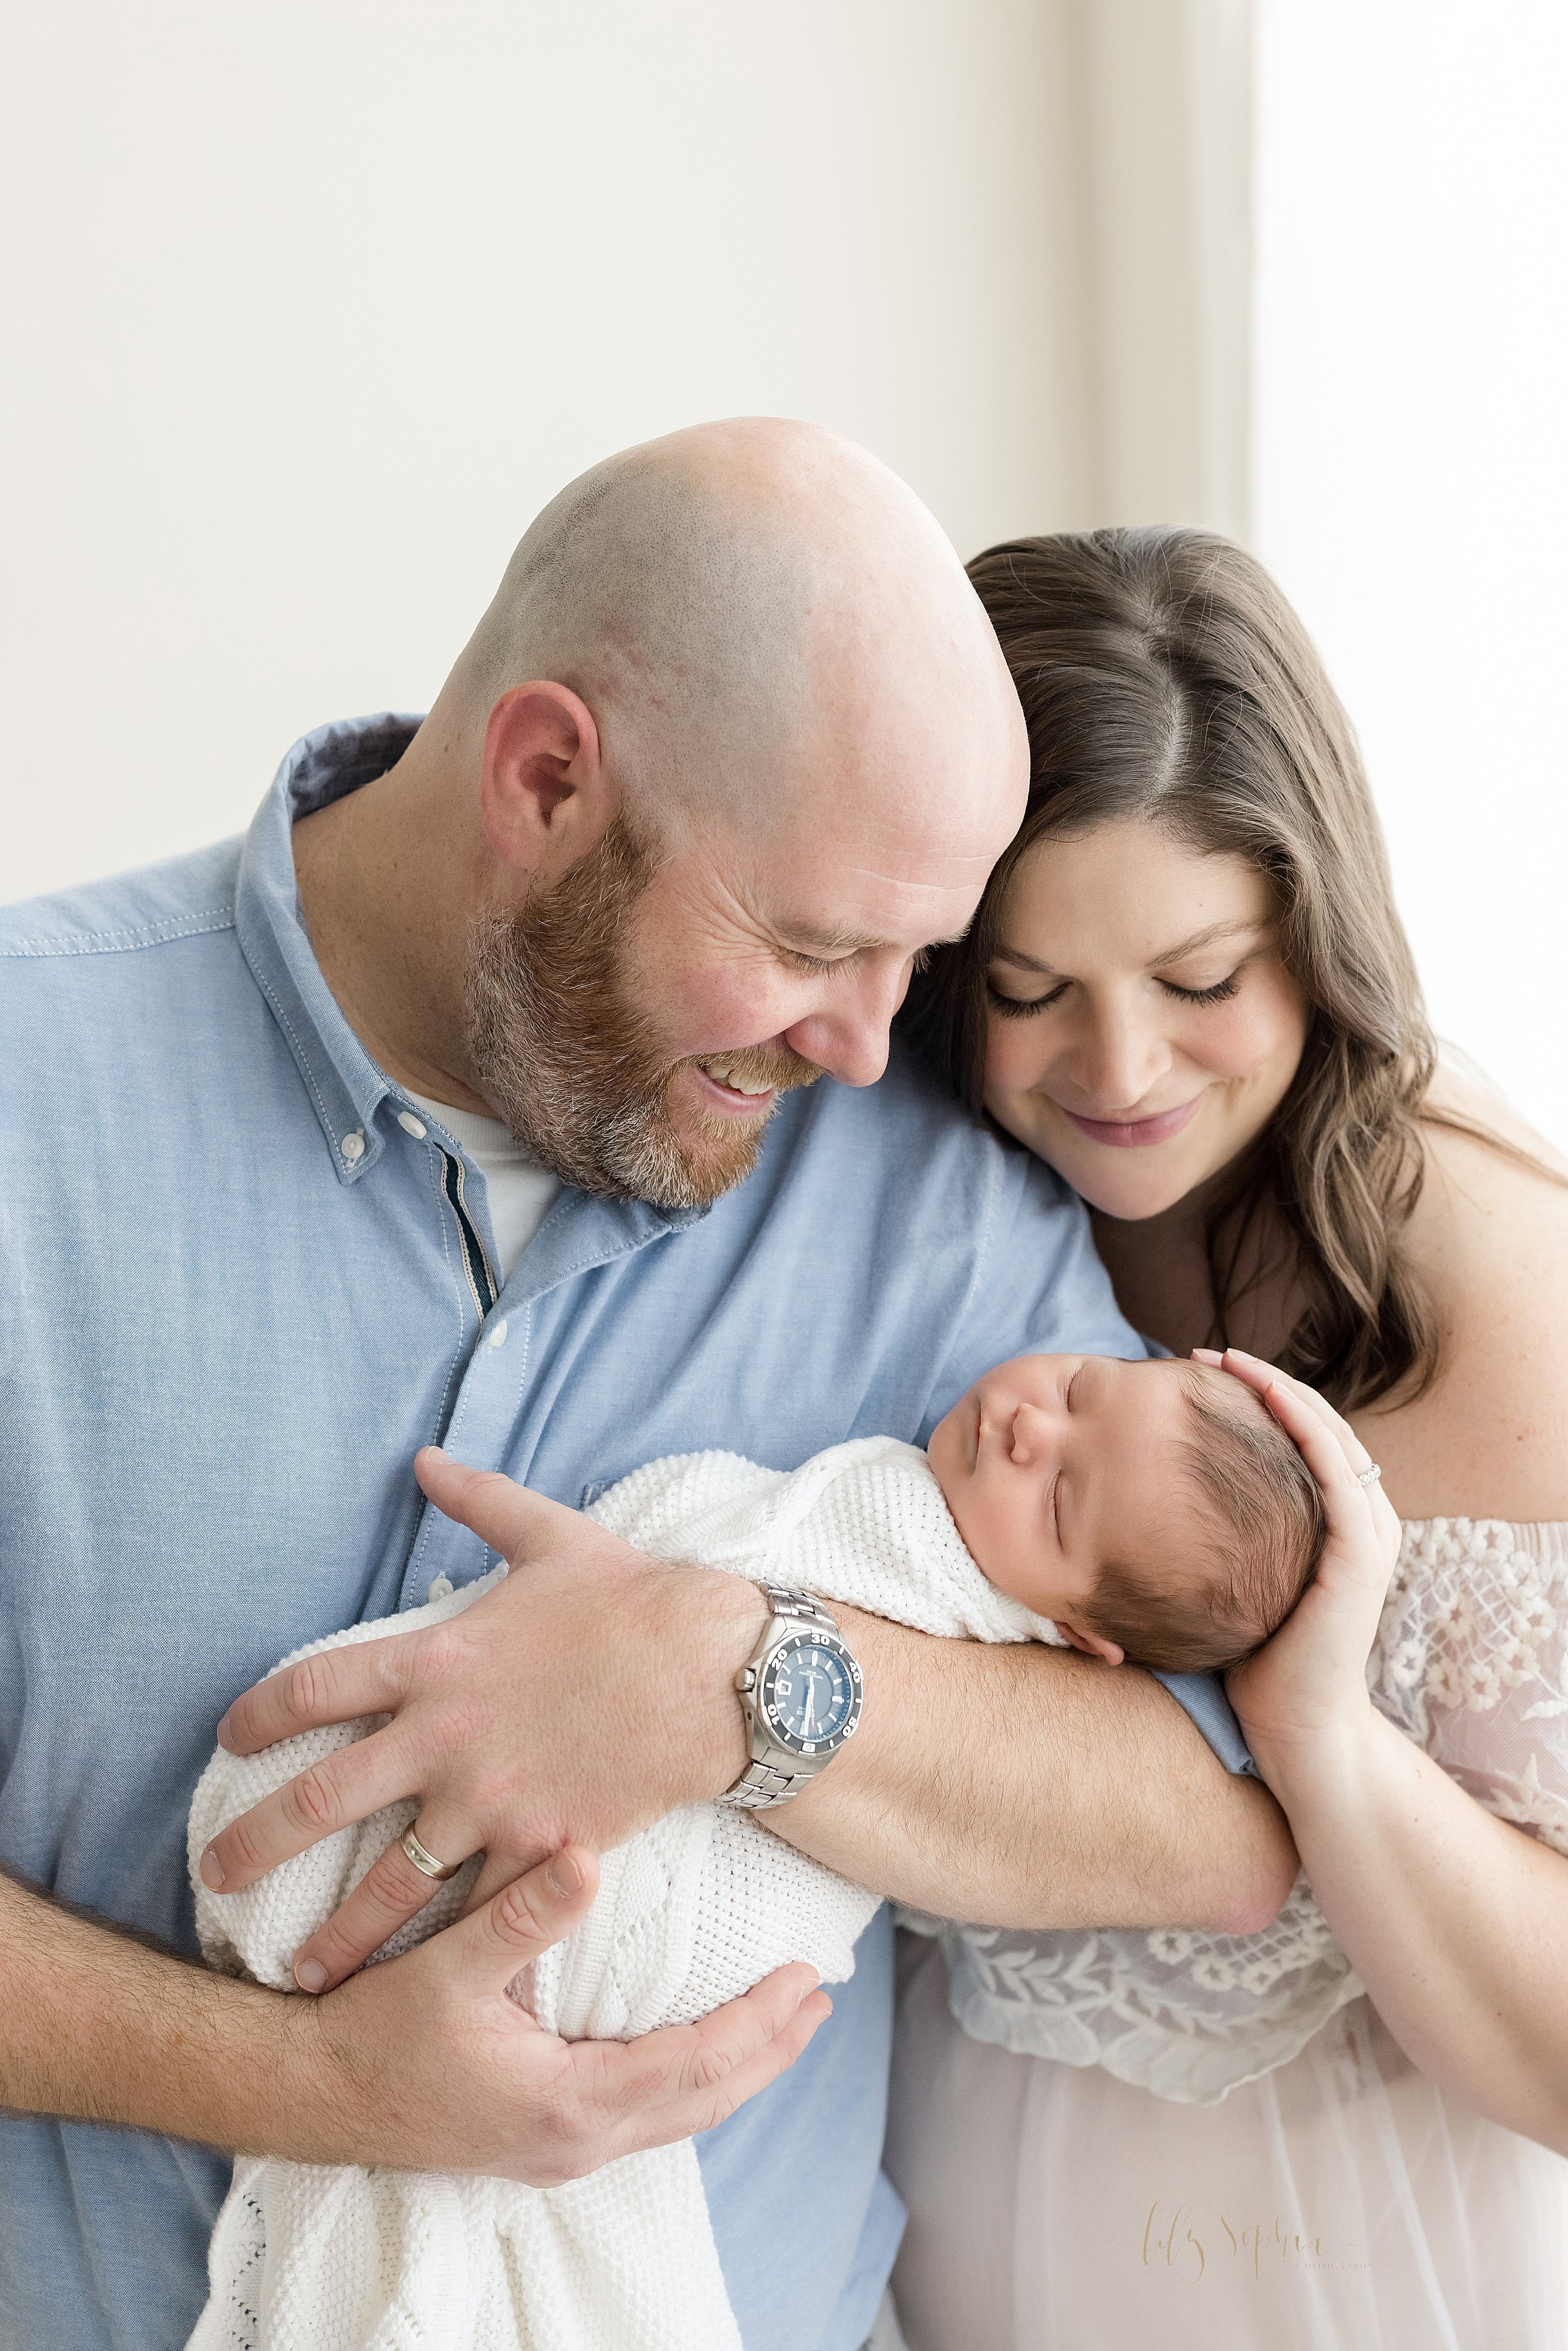  Newborn photoshoot with dad holding his newborn baby boy in his arms as mom stands slightly behind dad on his right hand side and she places her right hand on her son’s head as the couple stand in front of a window streaming natural light to admire 